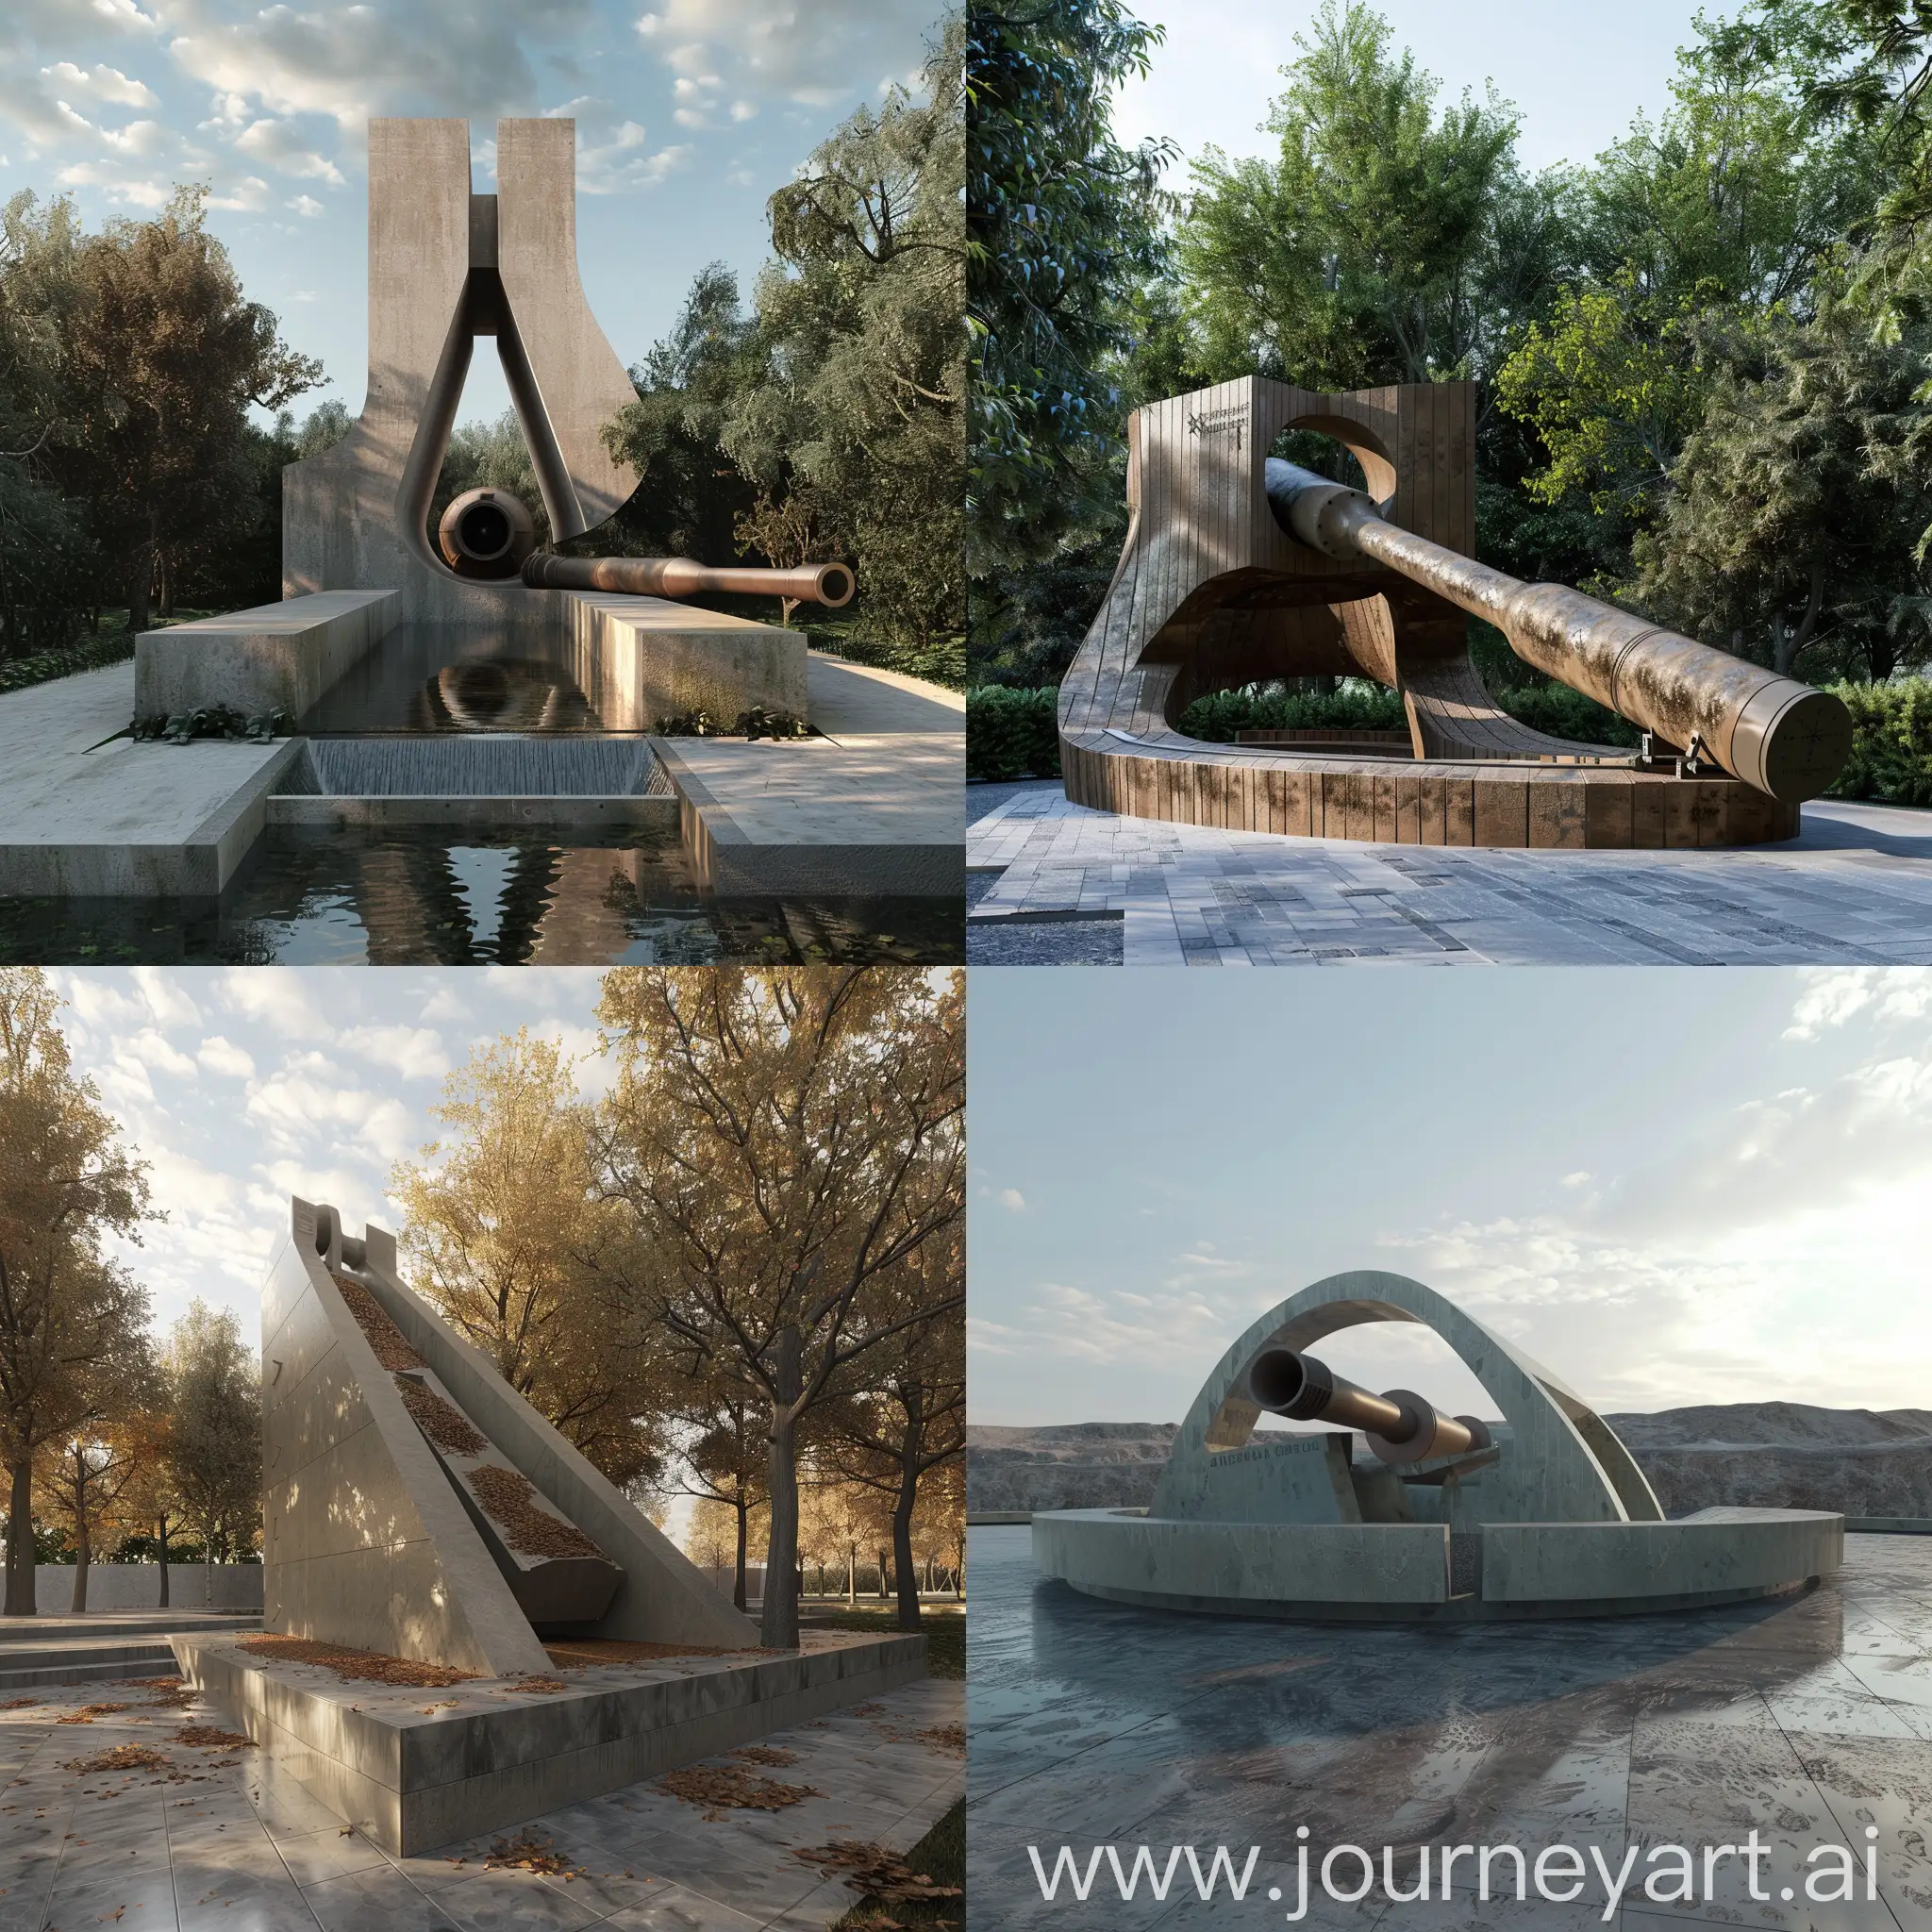 Architecturally Design a artillery memorial with its significancance